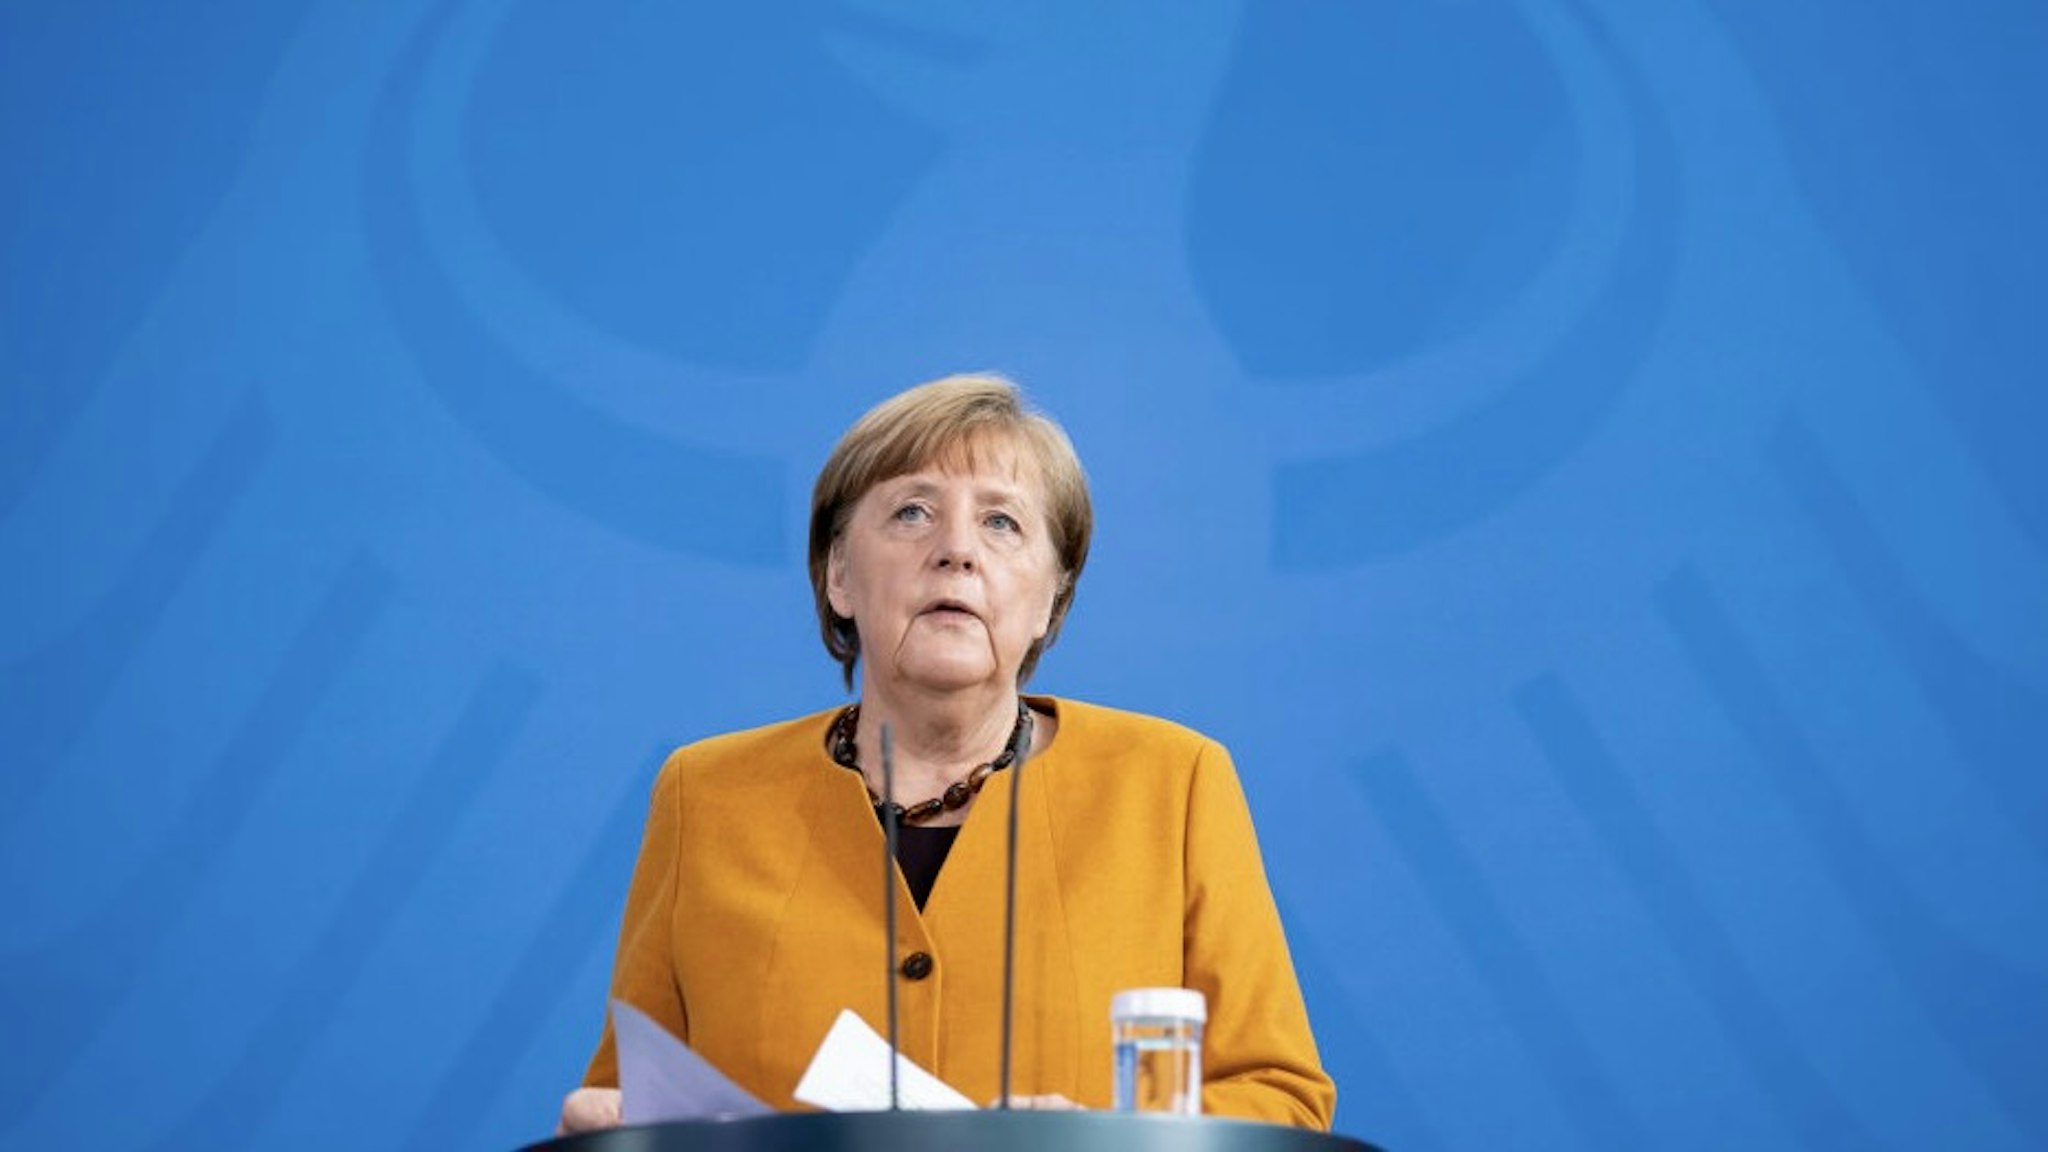 BERLIN, GERMANY - MARCH 24: German Chancellor Angela Merkel gives a statement to the media to announce a reversal of the recently planned hard lockdown for Easter on March 24, 2021 in Berlin, Germany. Merkel and leaders of Germany's 16 states had recently agreed to the hardest lockdown to date for the Easter period of April 1 through April 5 in an effort to stem the spread of the B117 coronavirus variant. COVID-19 infection rates are currently rising strongly in Germany. (Photo by Henning Schacht - Pool/Getty Images)